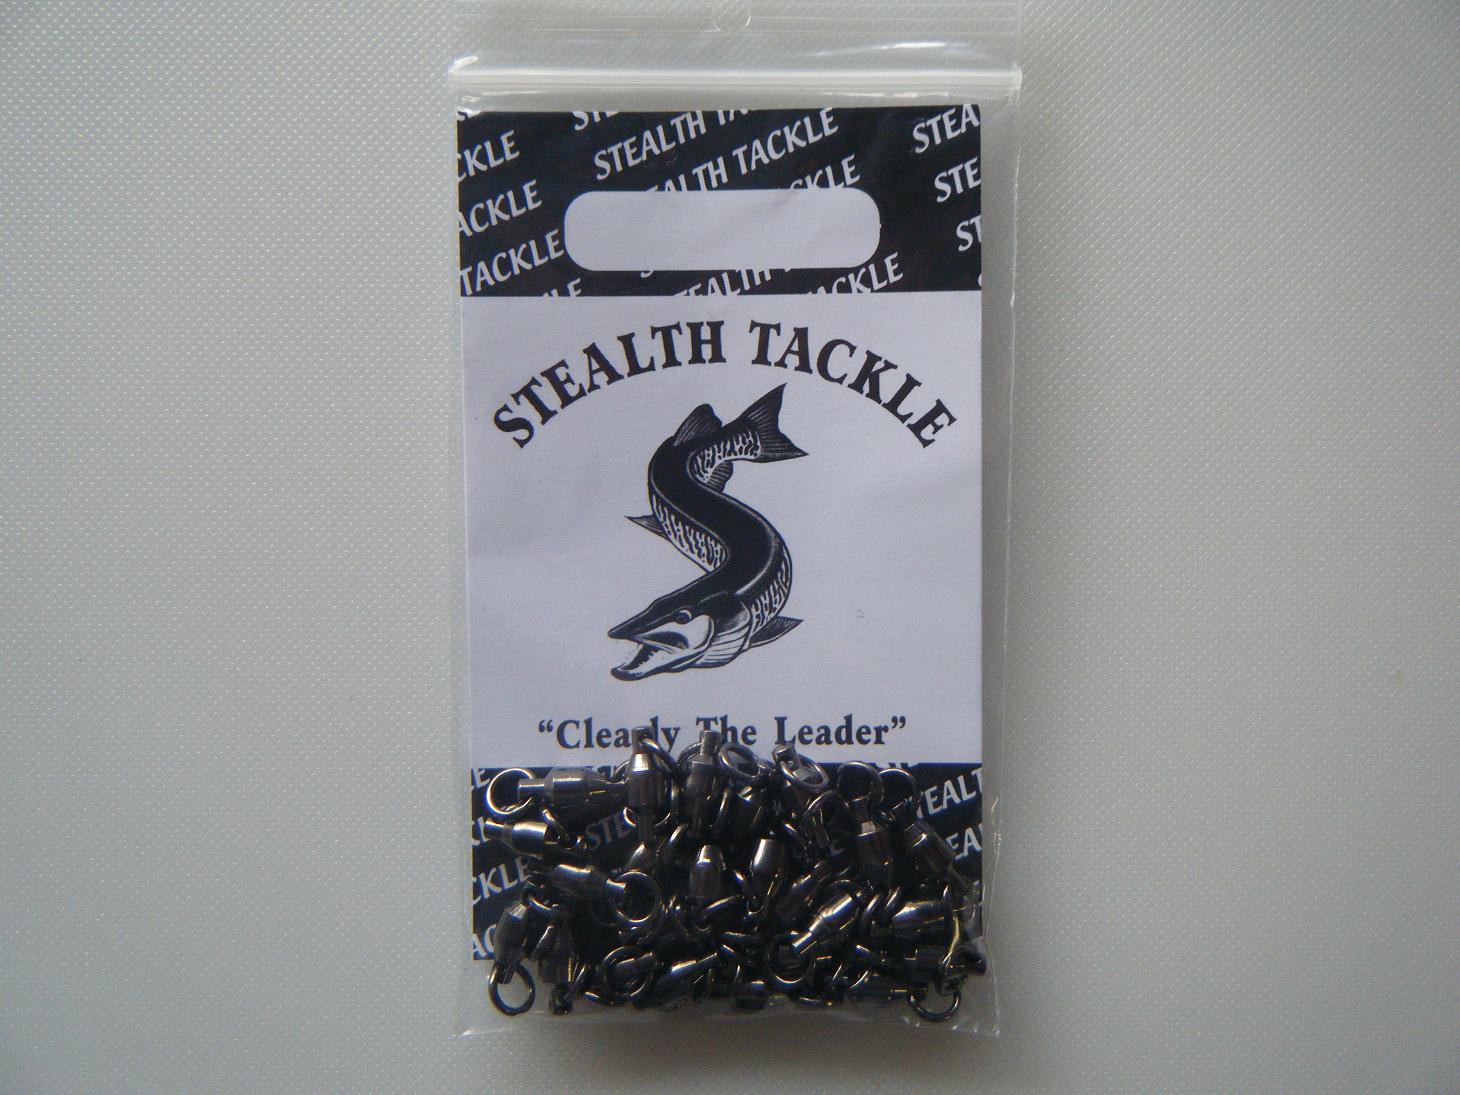 Stealth Tackle High Quality Ball Bearing Swivels - Stealth Tackle